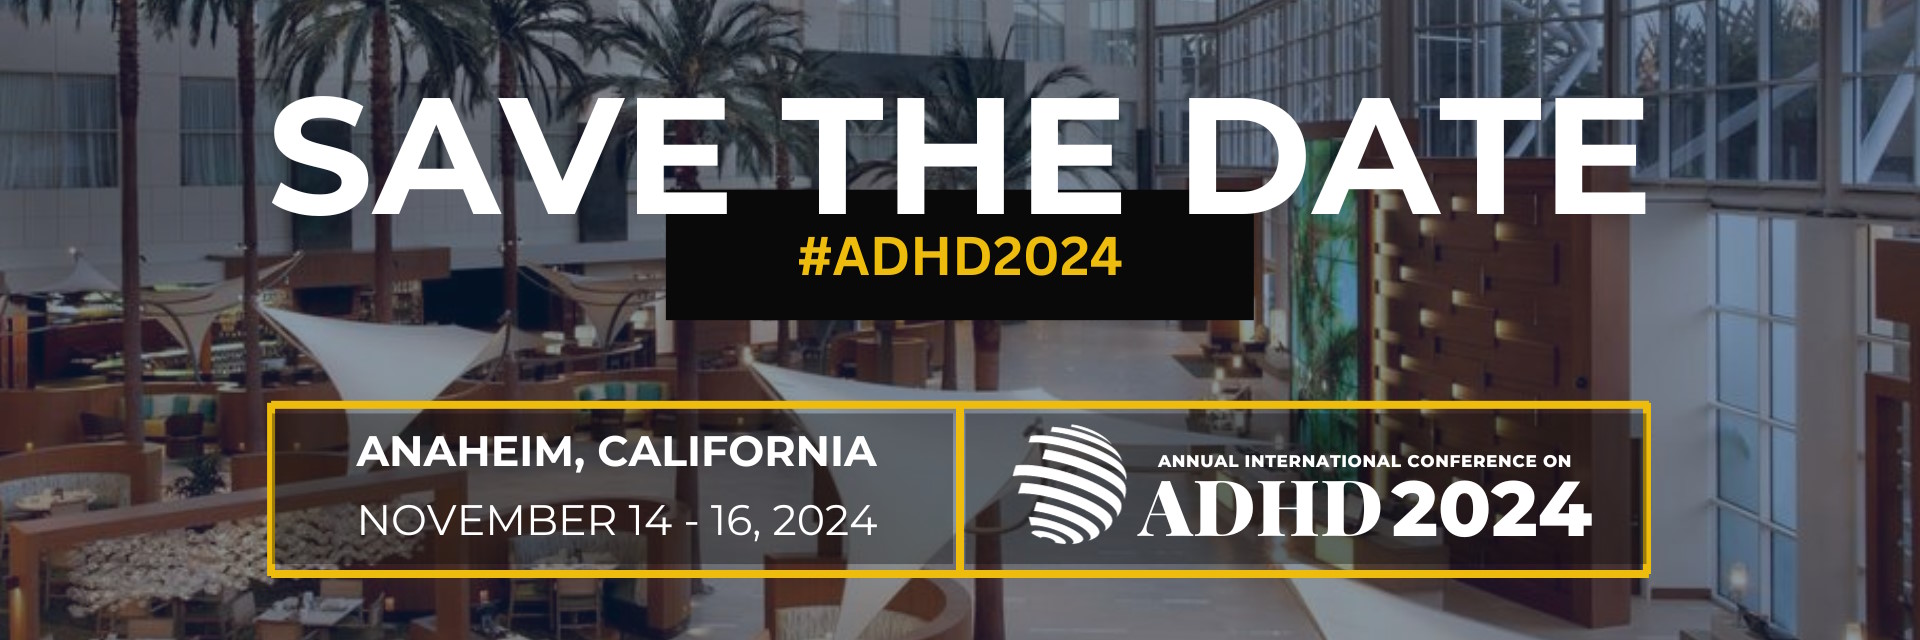 ADHD2024 SAVE THE DATE